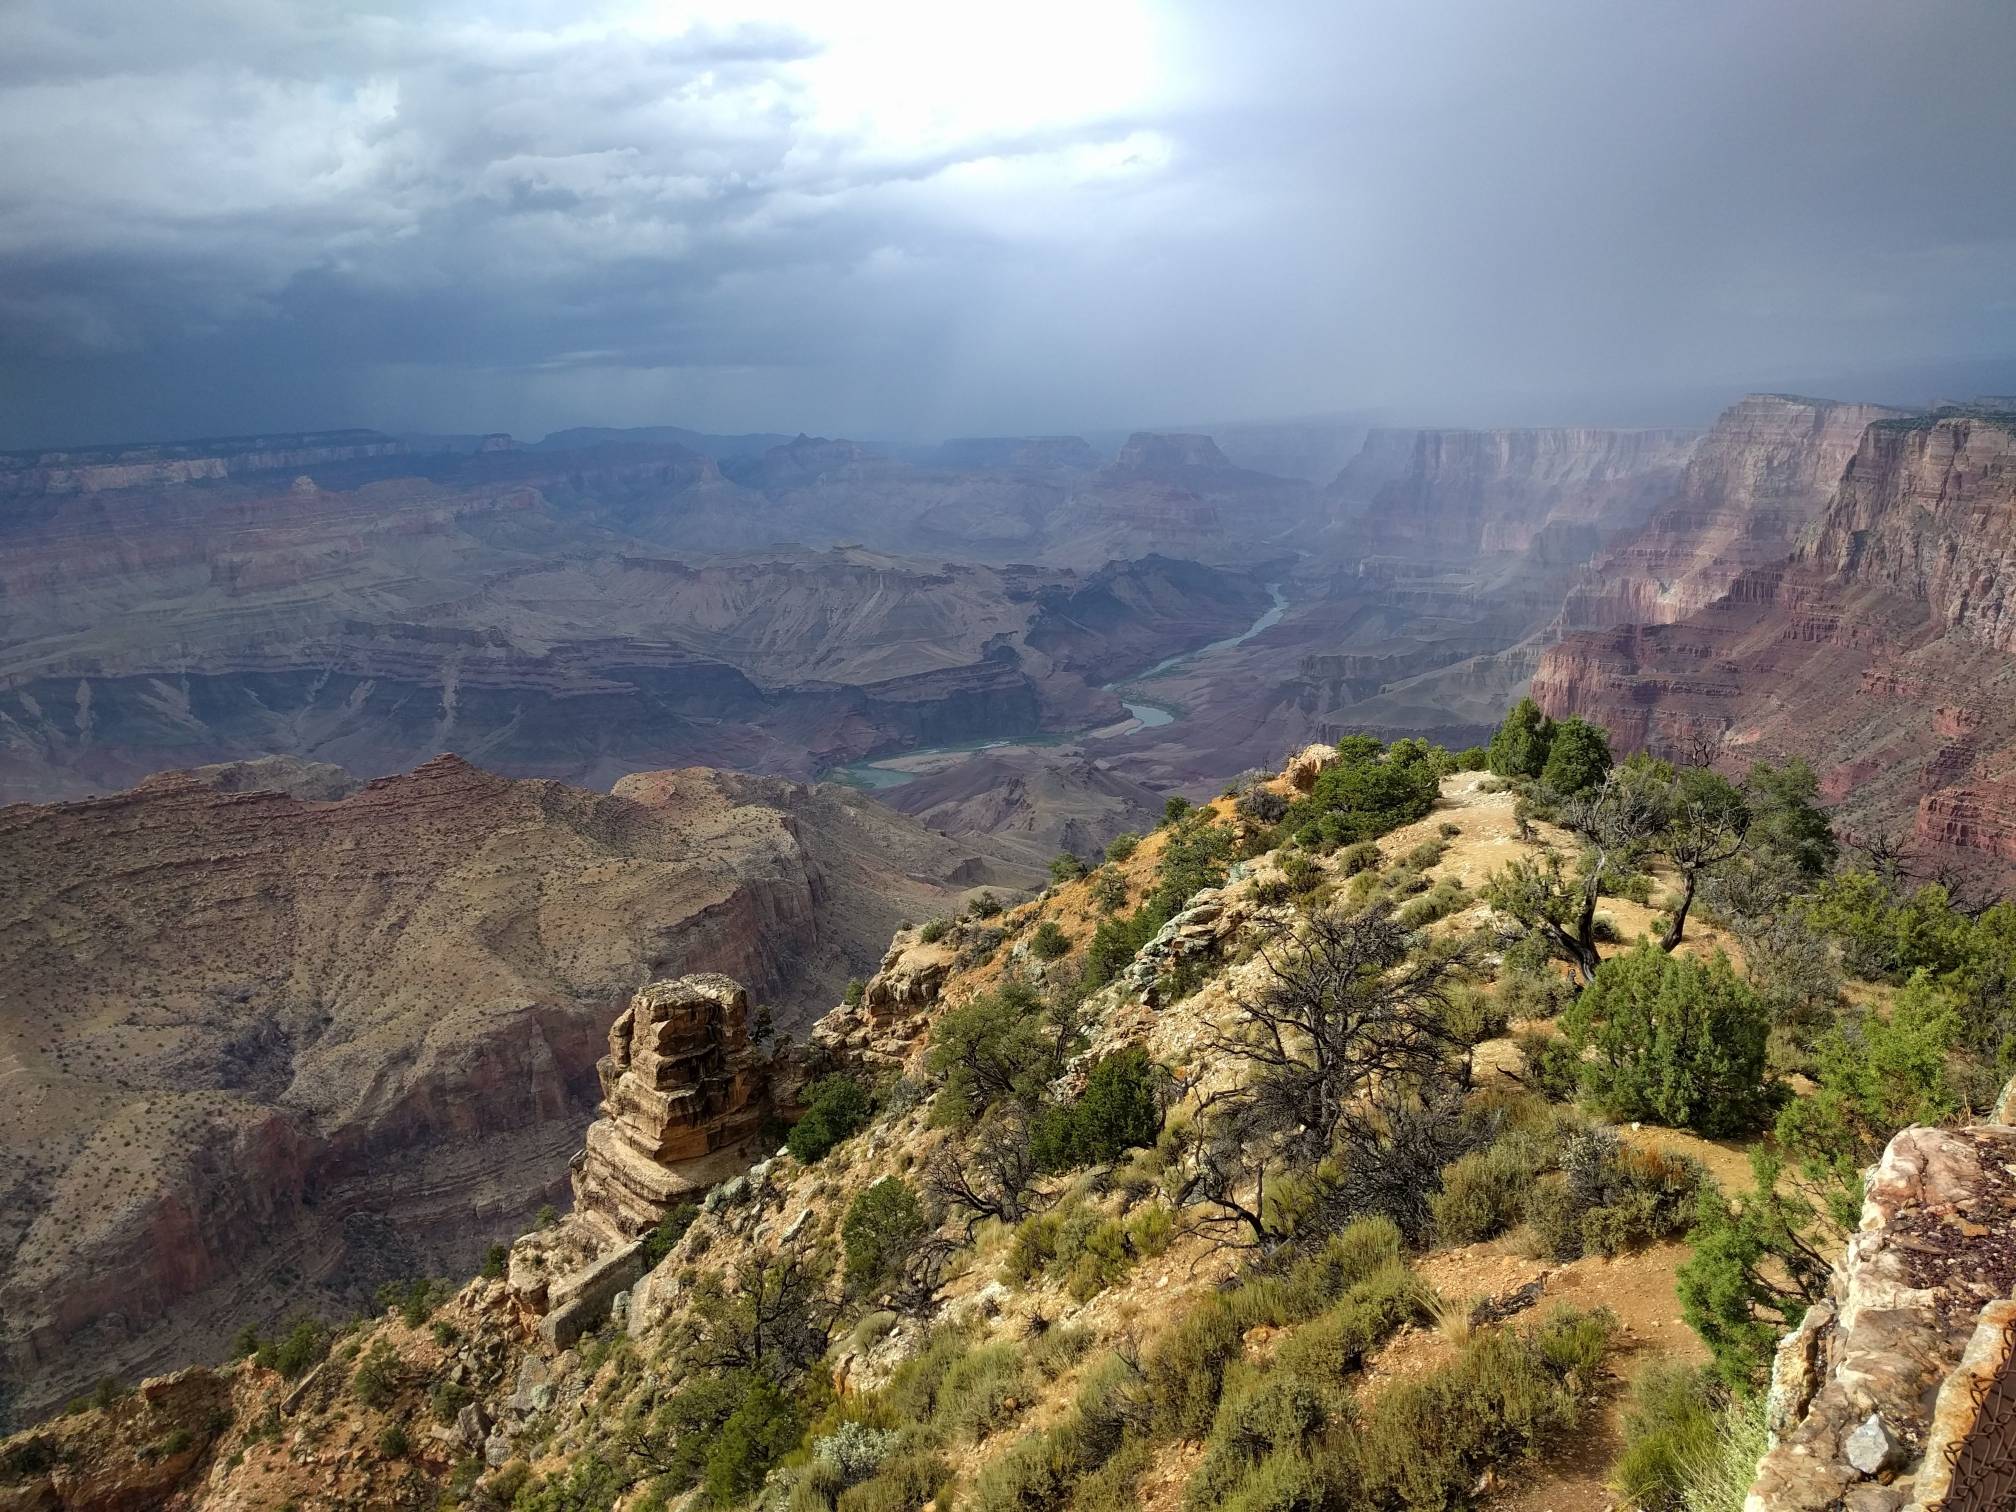 Image: The Grand Canyon after a rainstorm